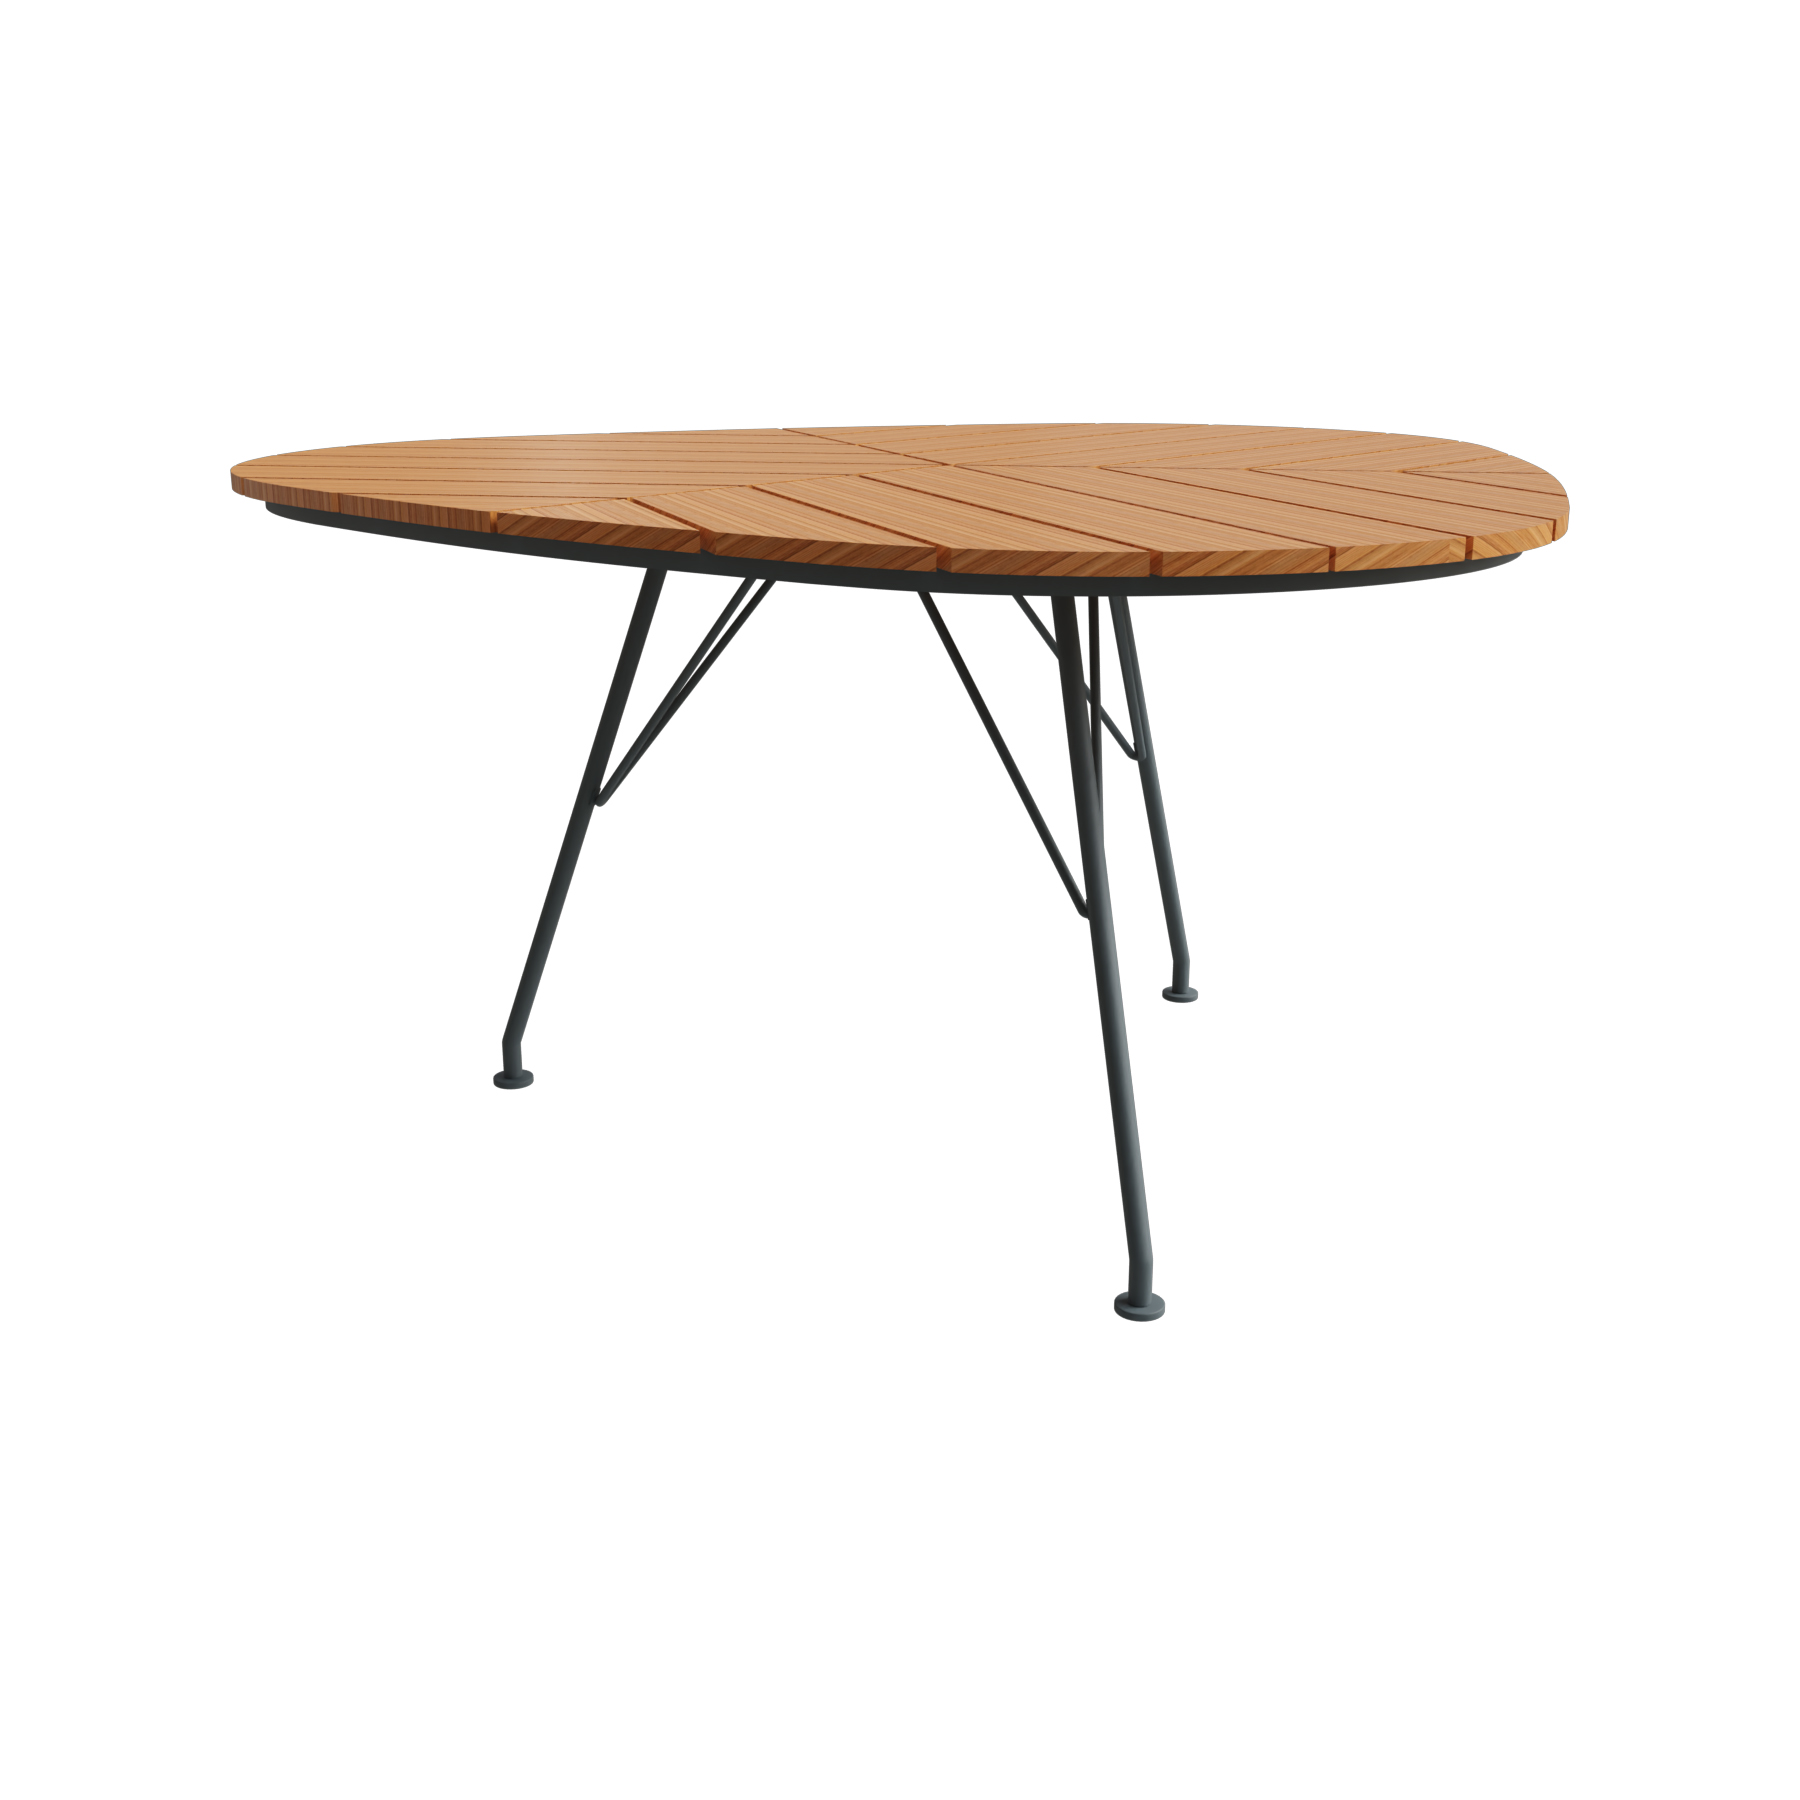 Dining Table Leaf, Bambus 11601-0318